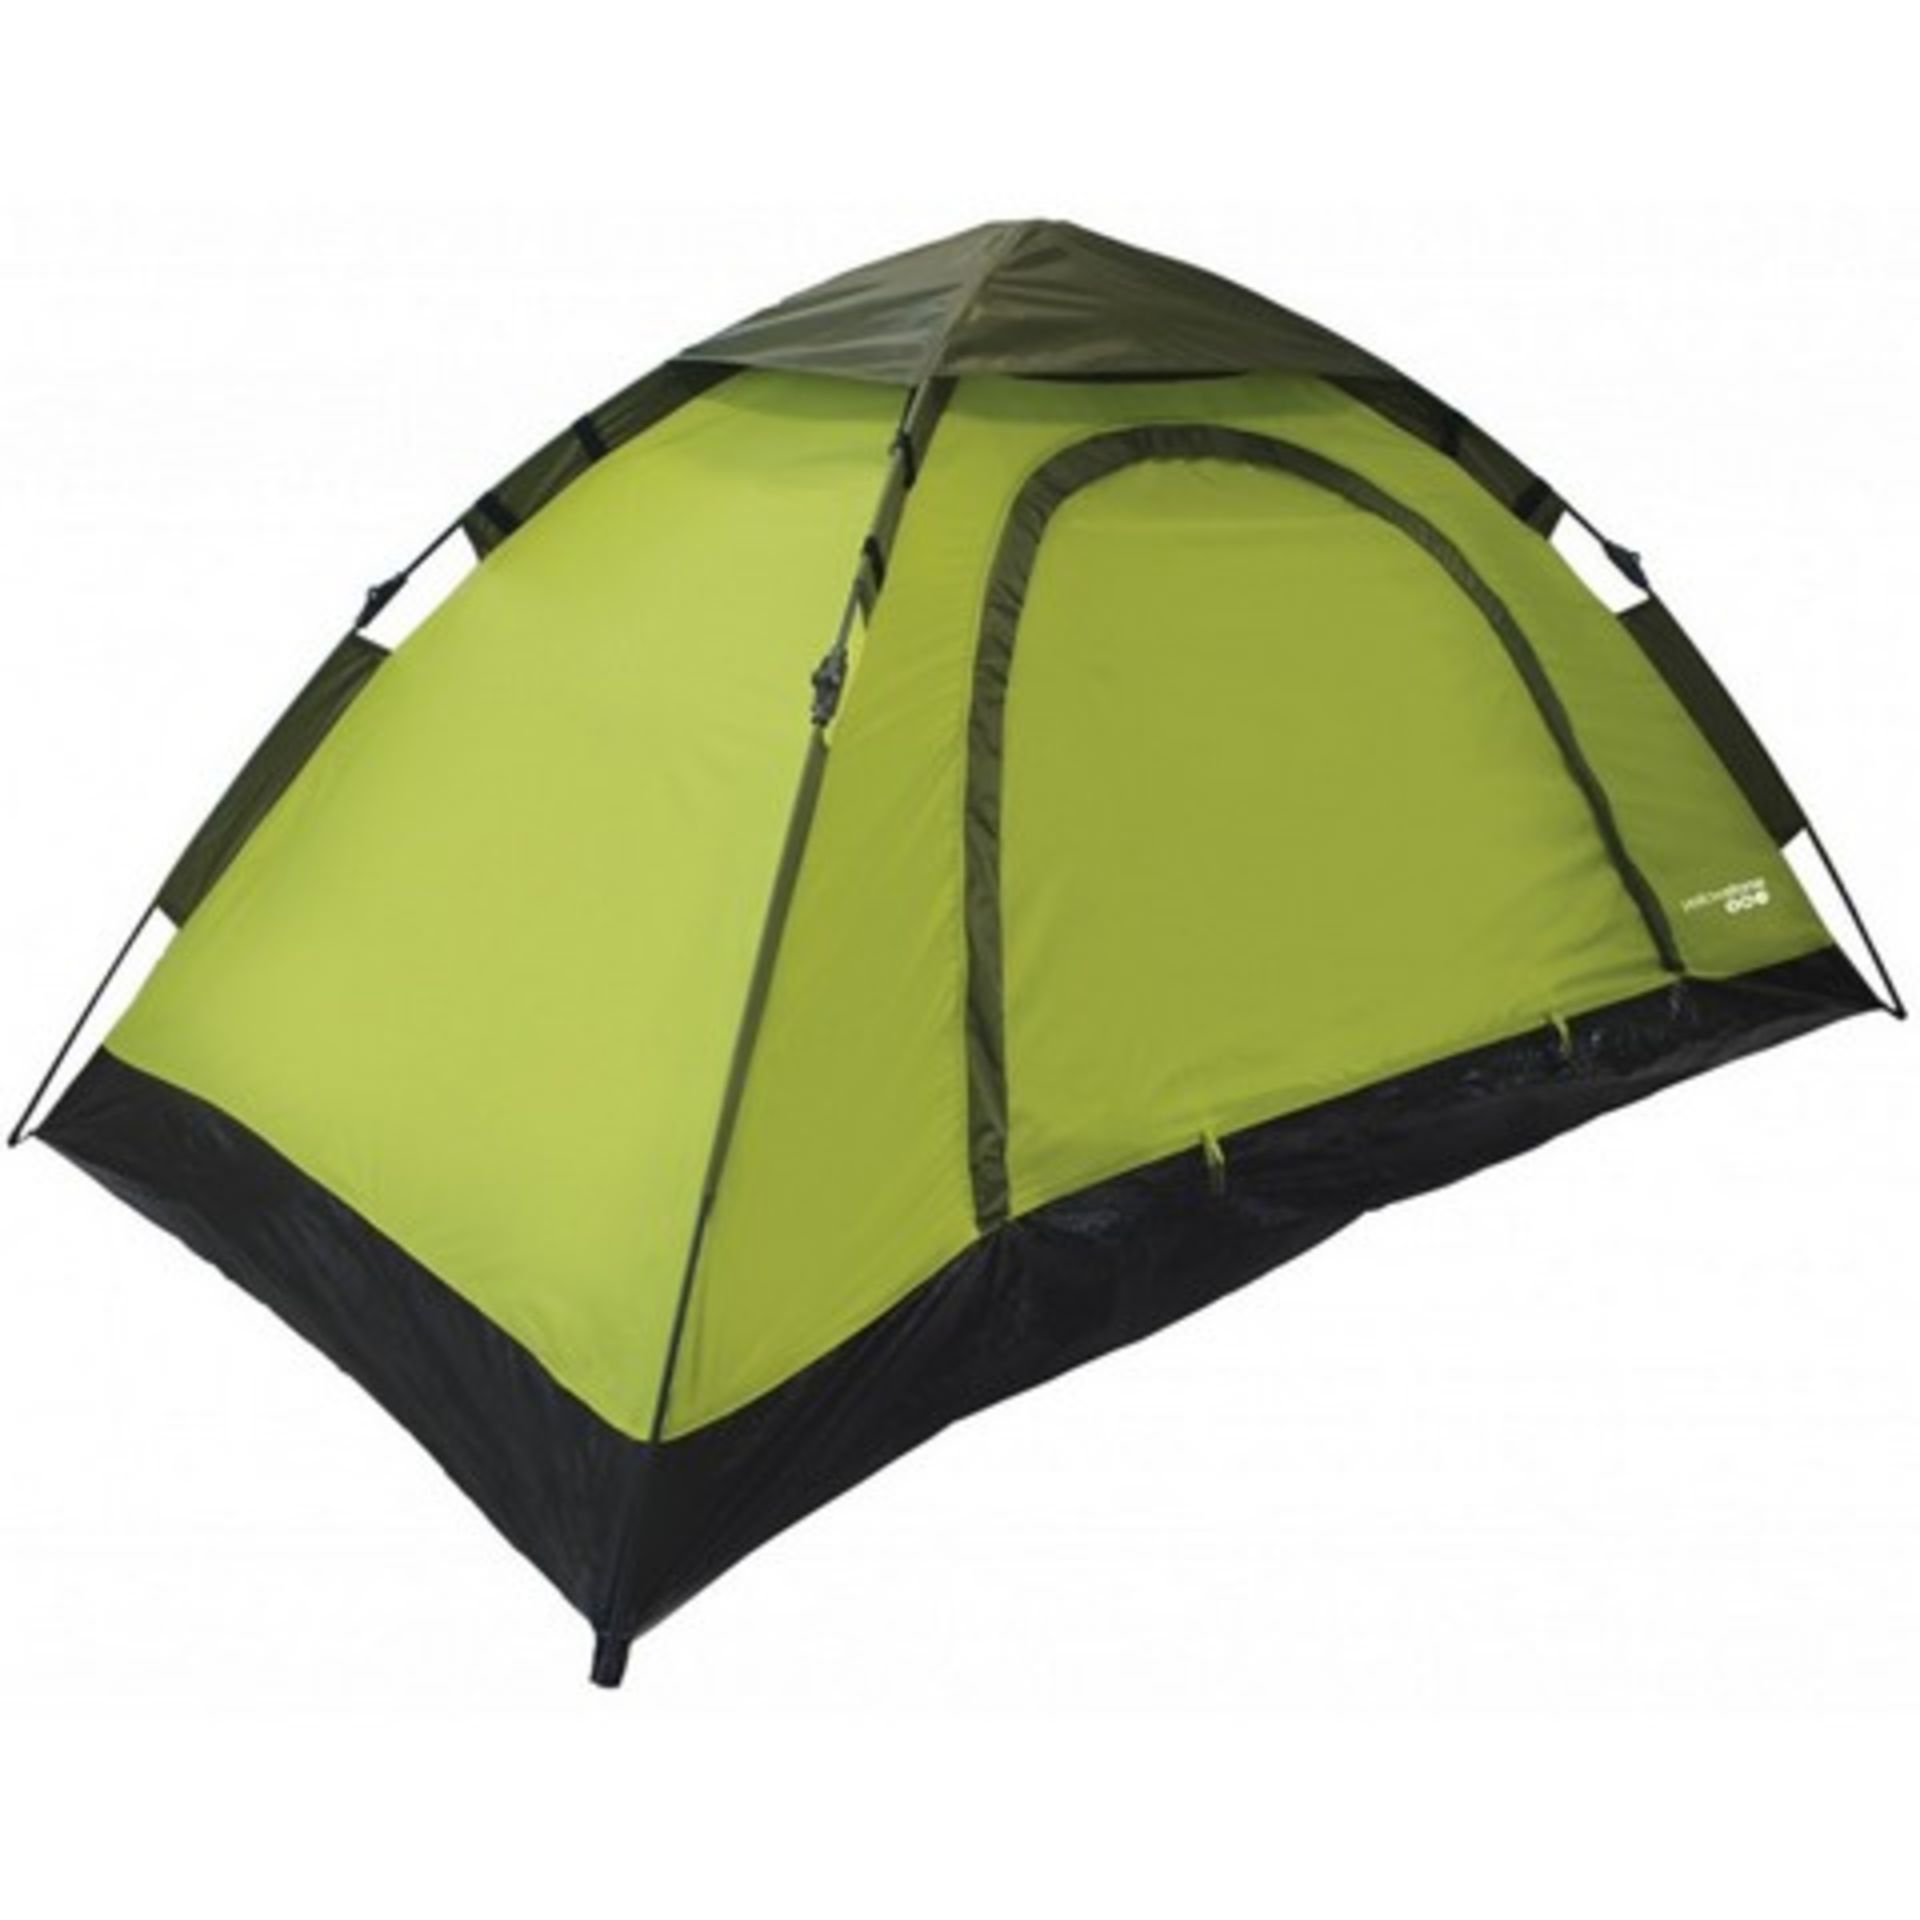 V Brand New 2 Man Umbrella Rapid Tent With Canopy - Green/Charcoal - Sewn in Groundsheet - Easy Push